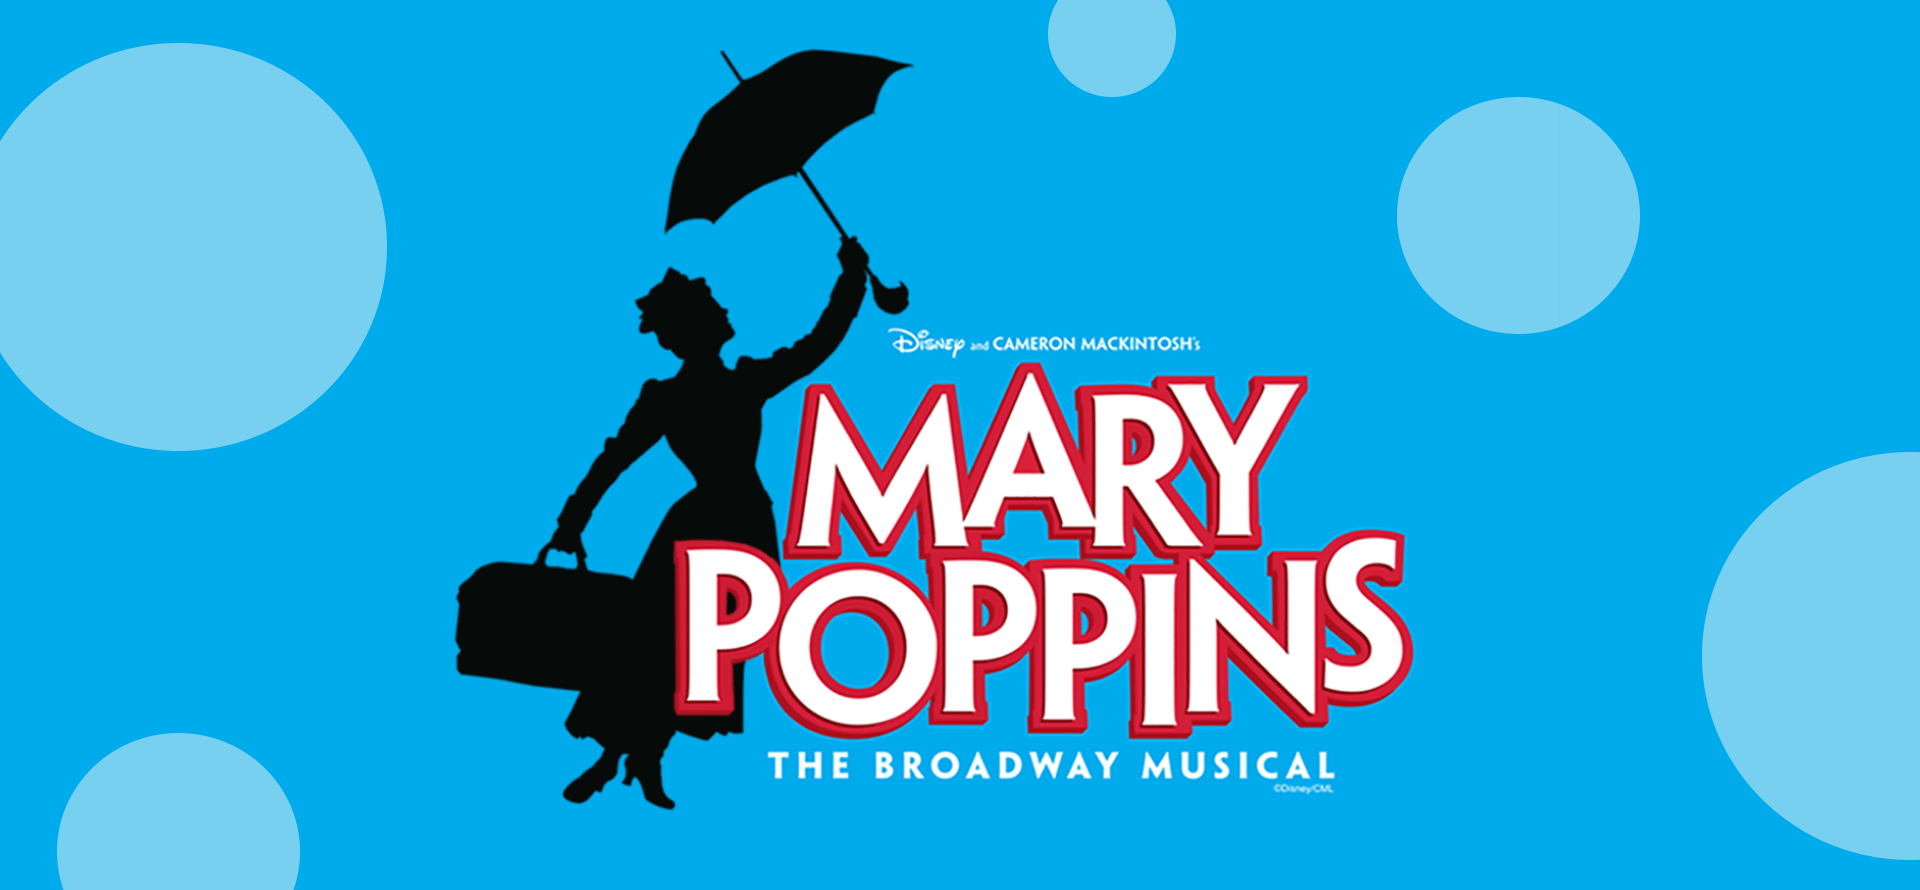 Mary Poppins Logo - mary poppins - logo - banner | Young People's Theatre